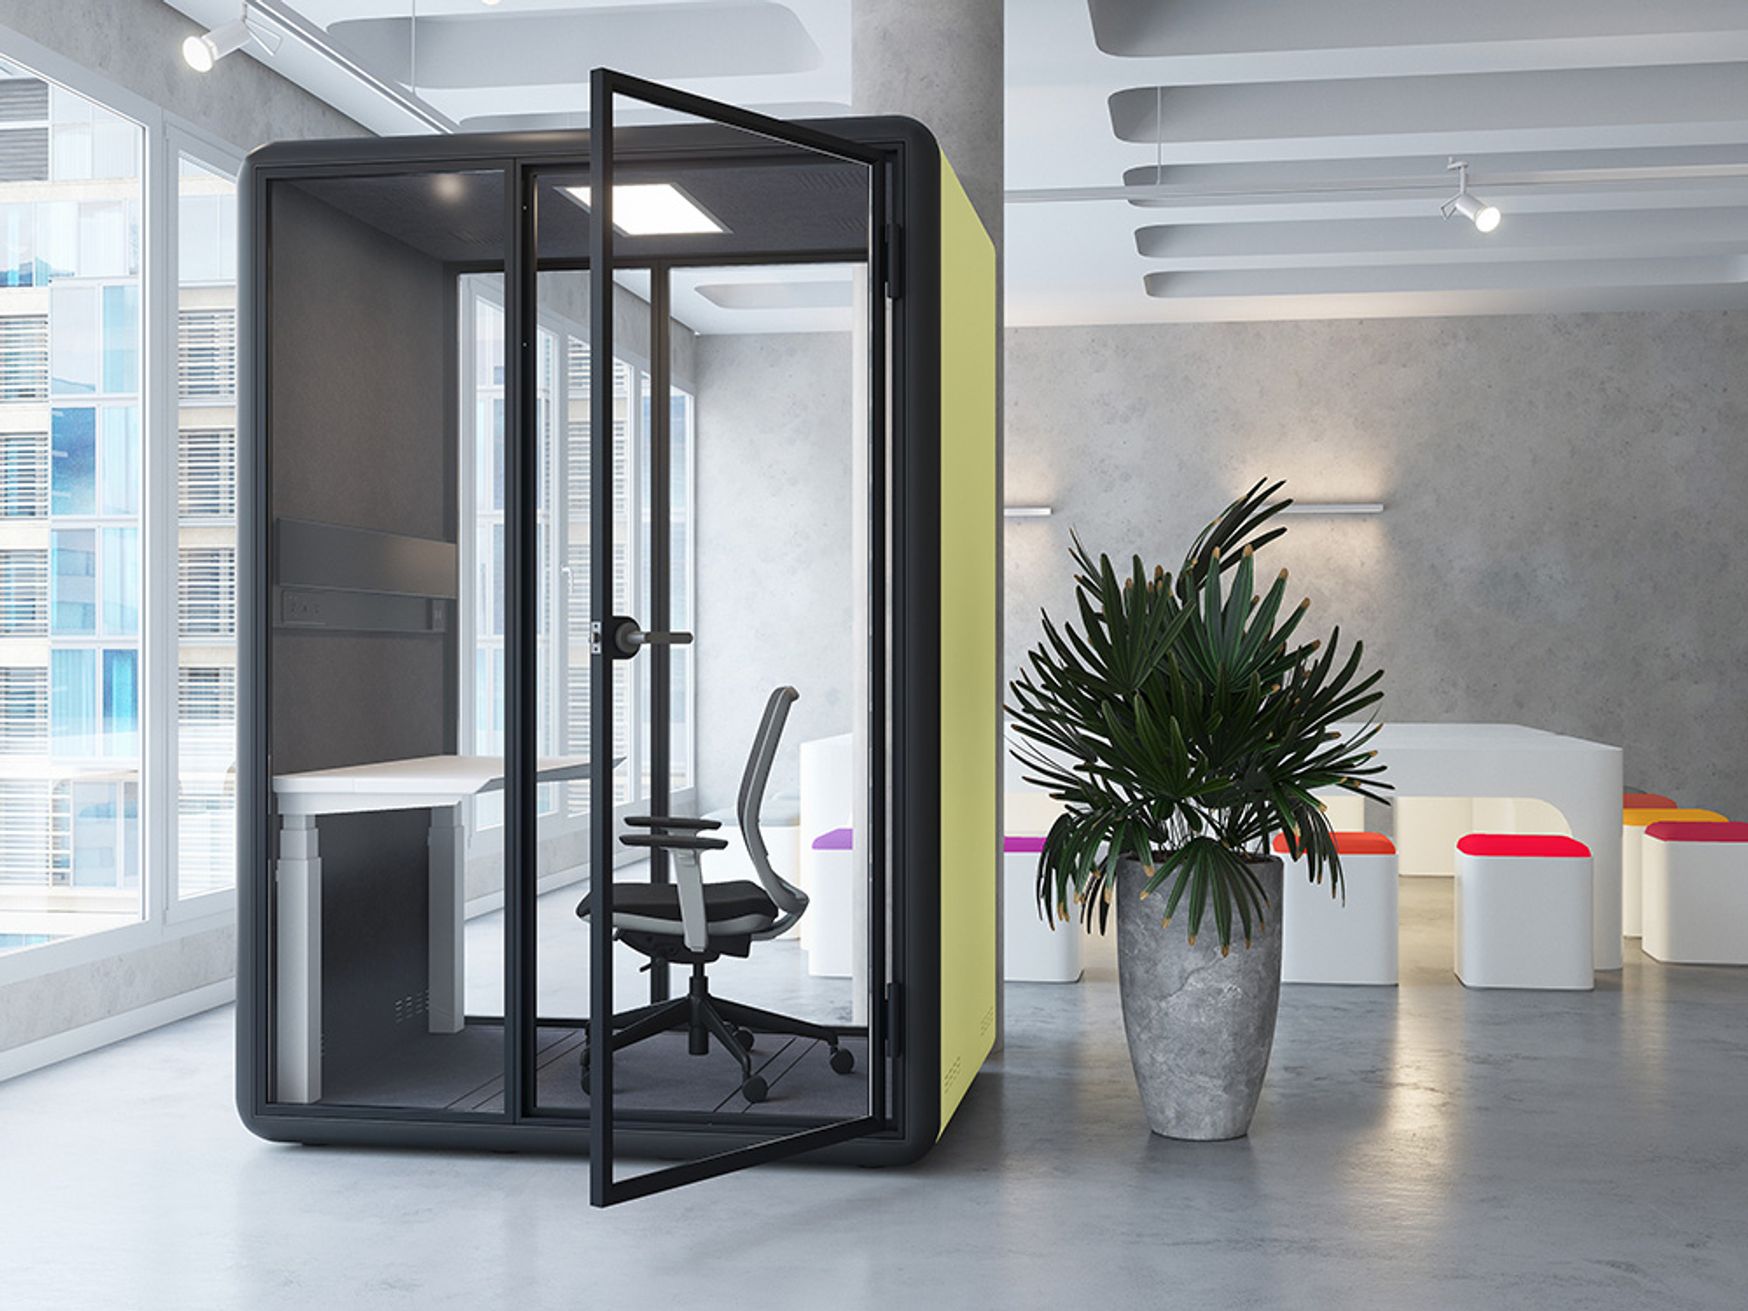 A self-contained individual work space booth with a high dB rating